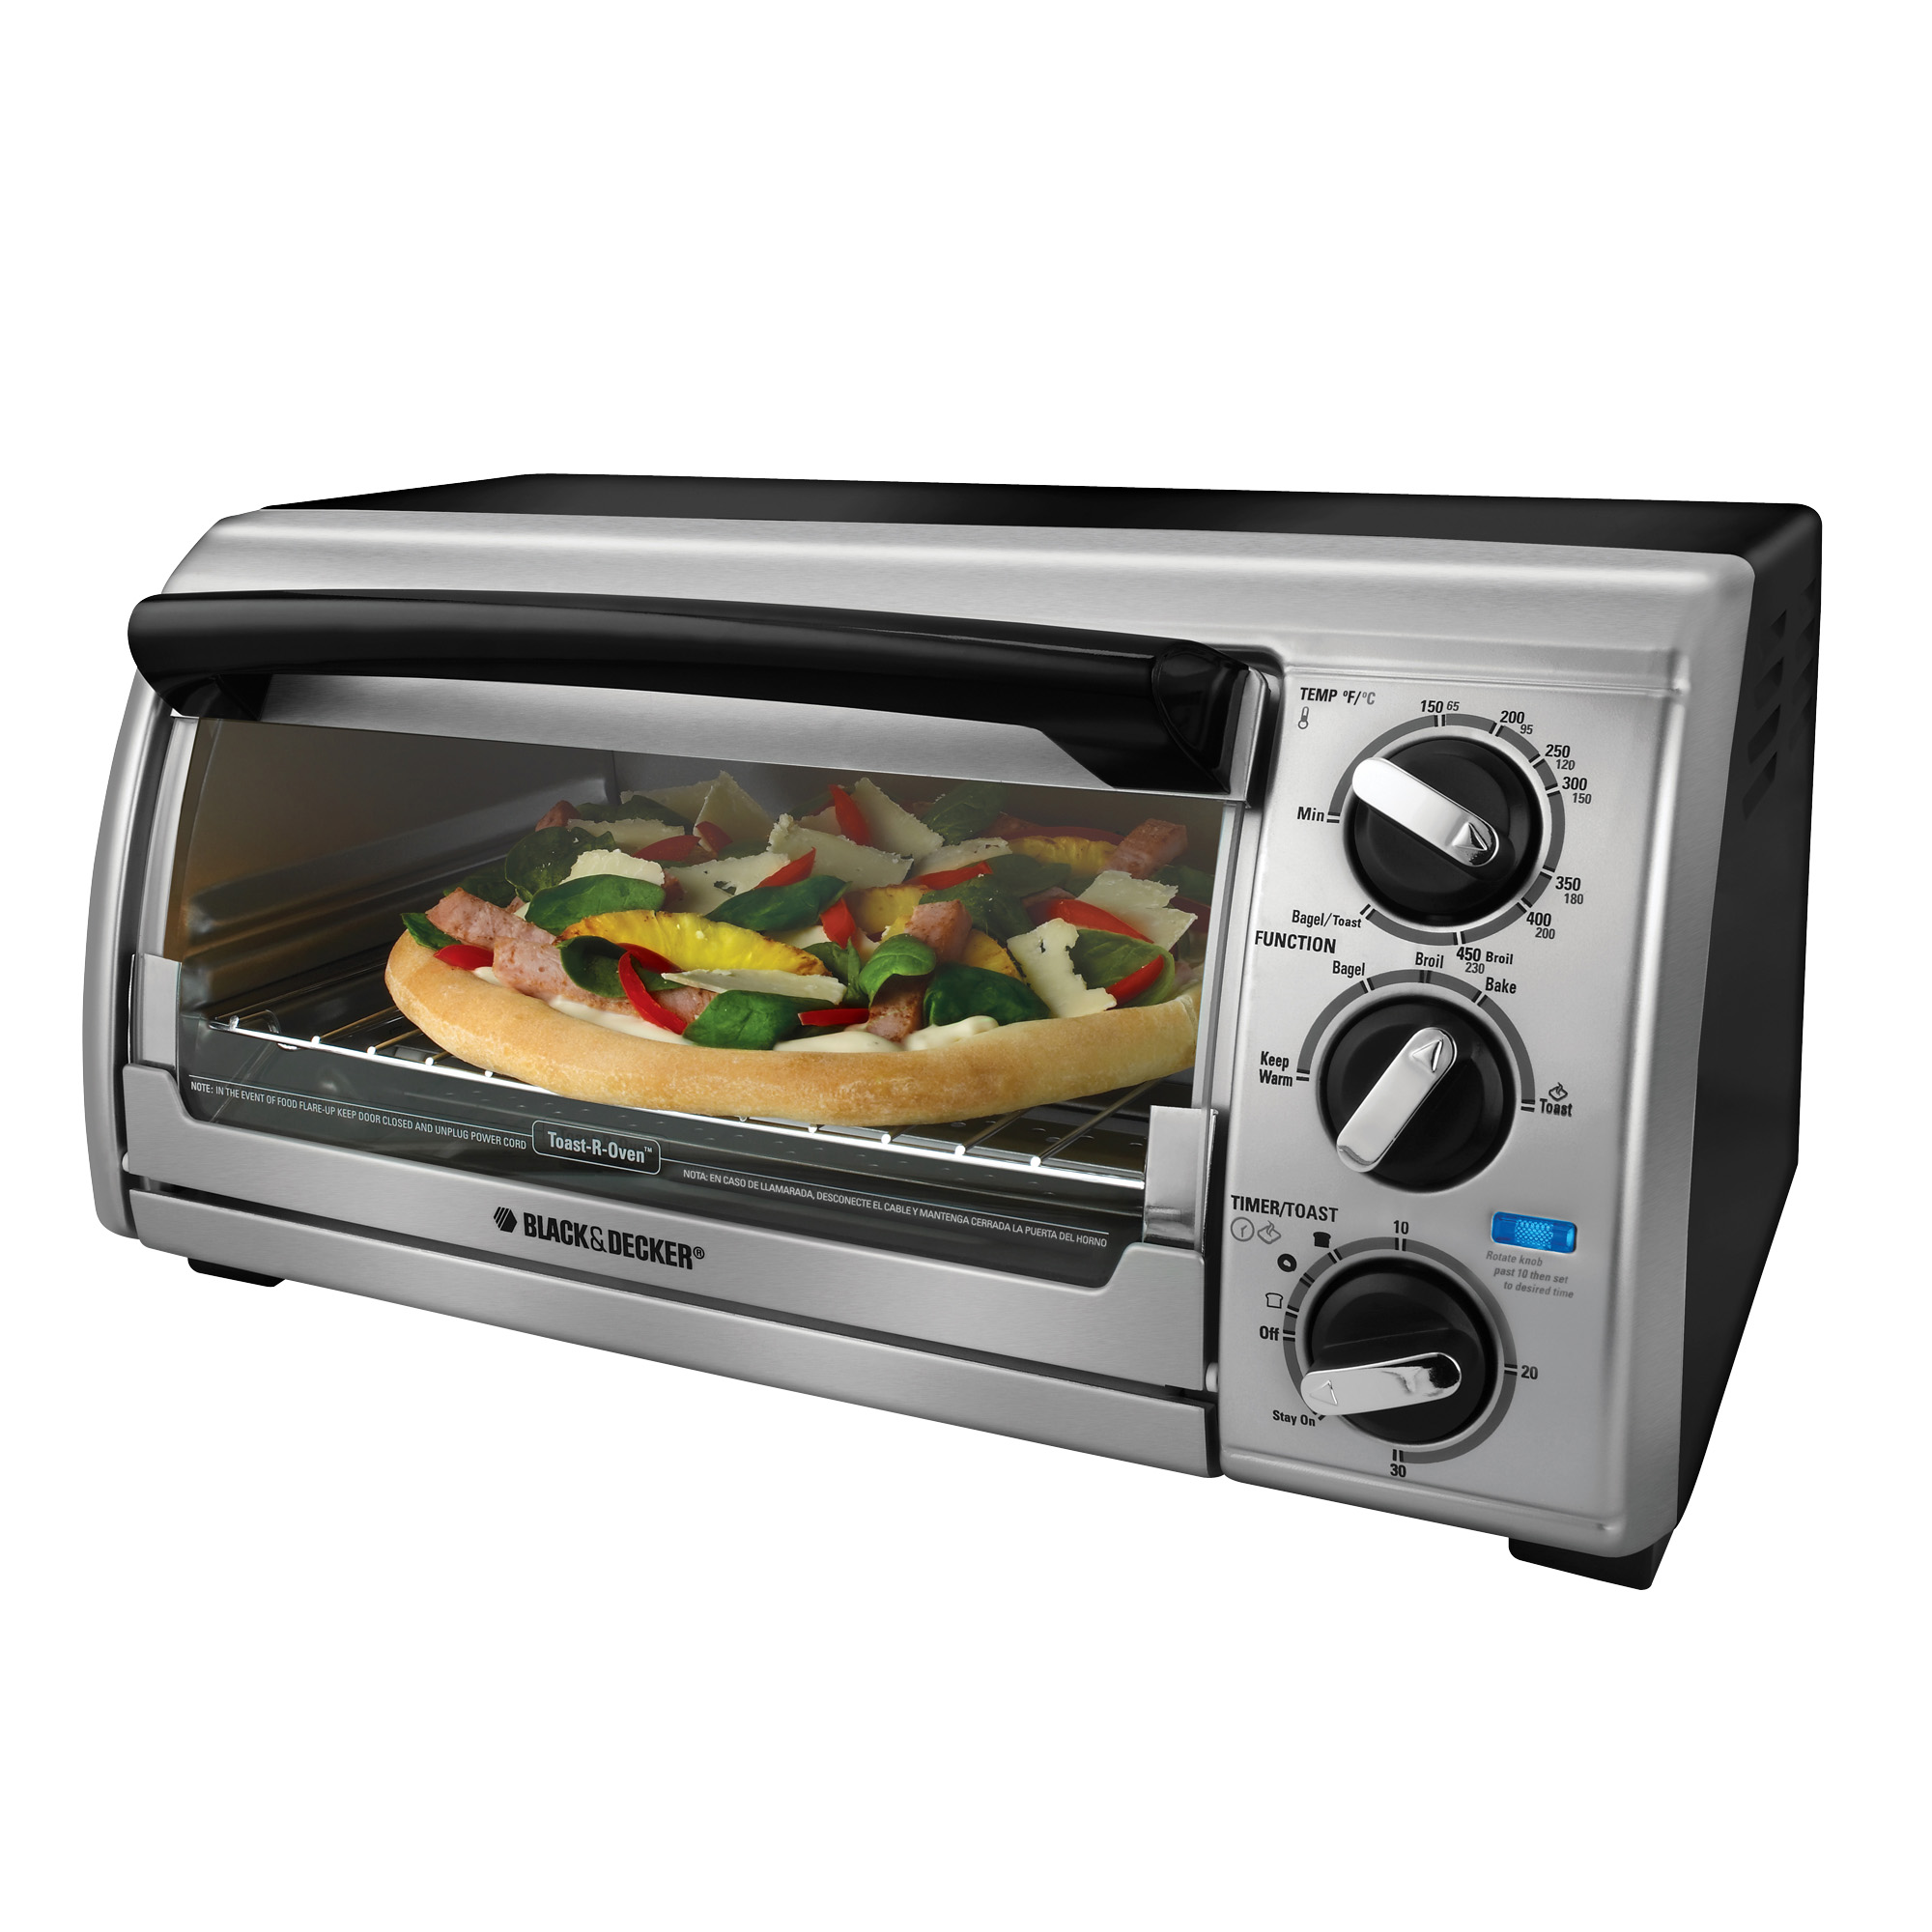 Large Black and Decker Toaster Oven